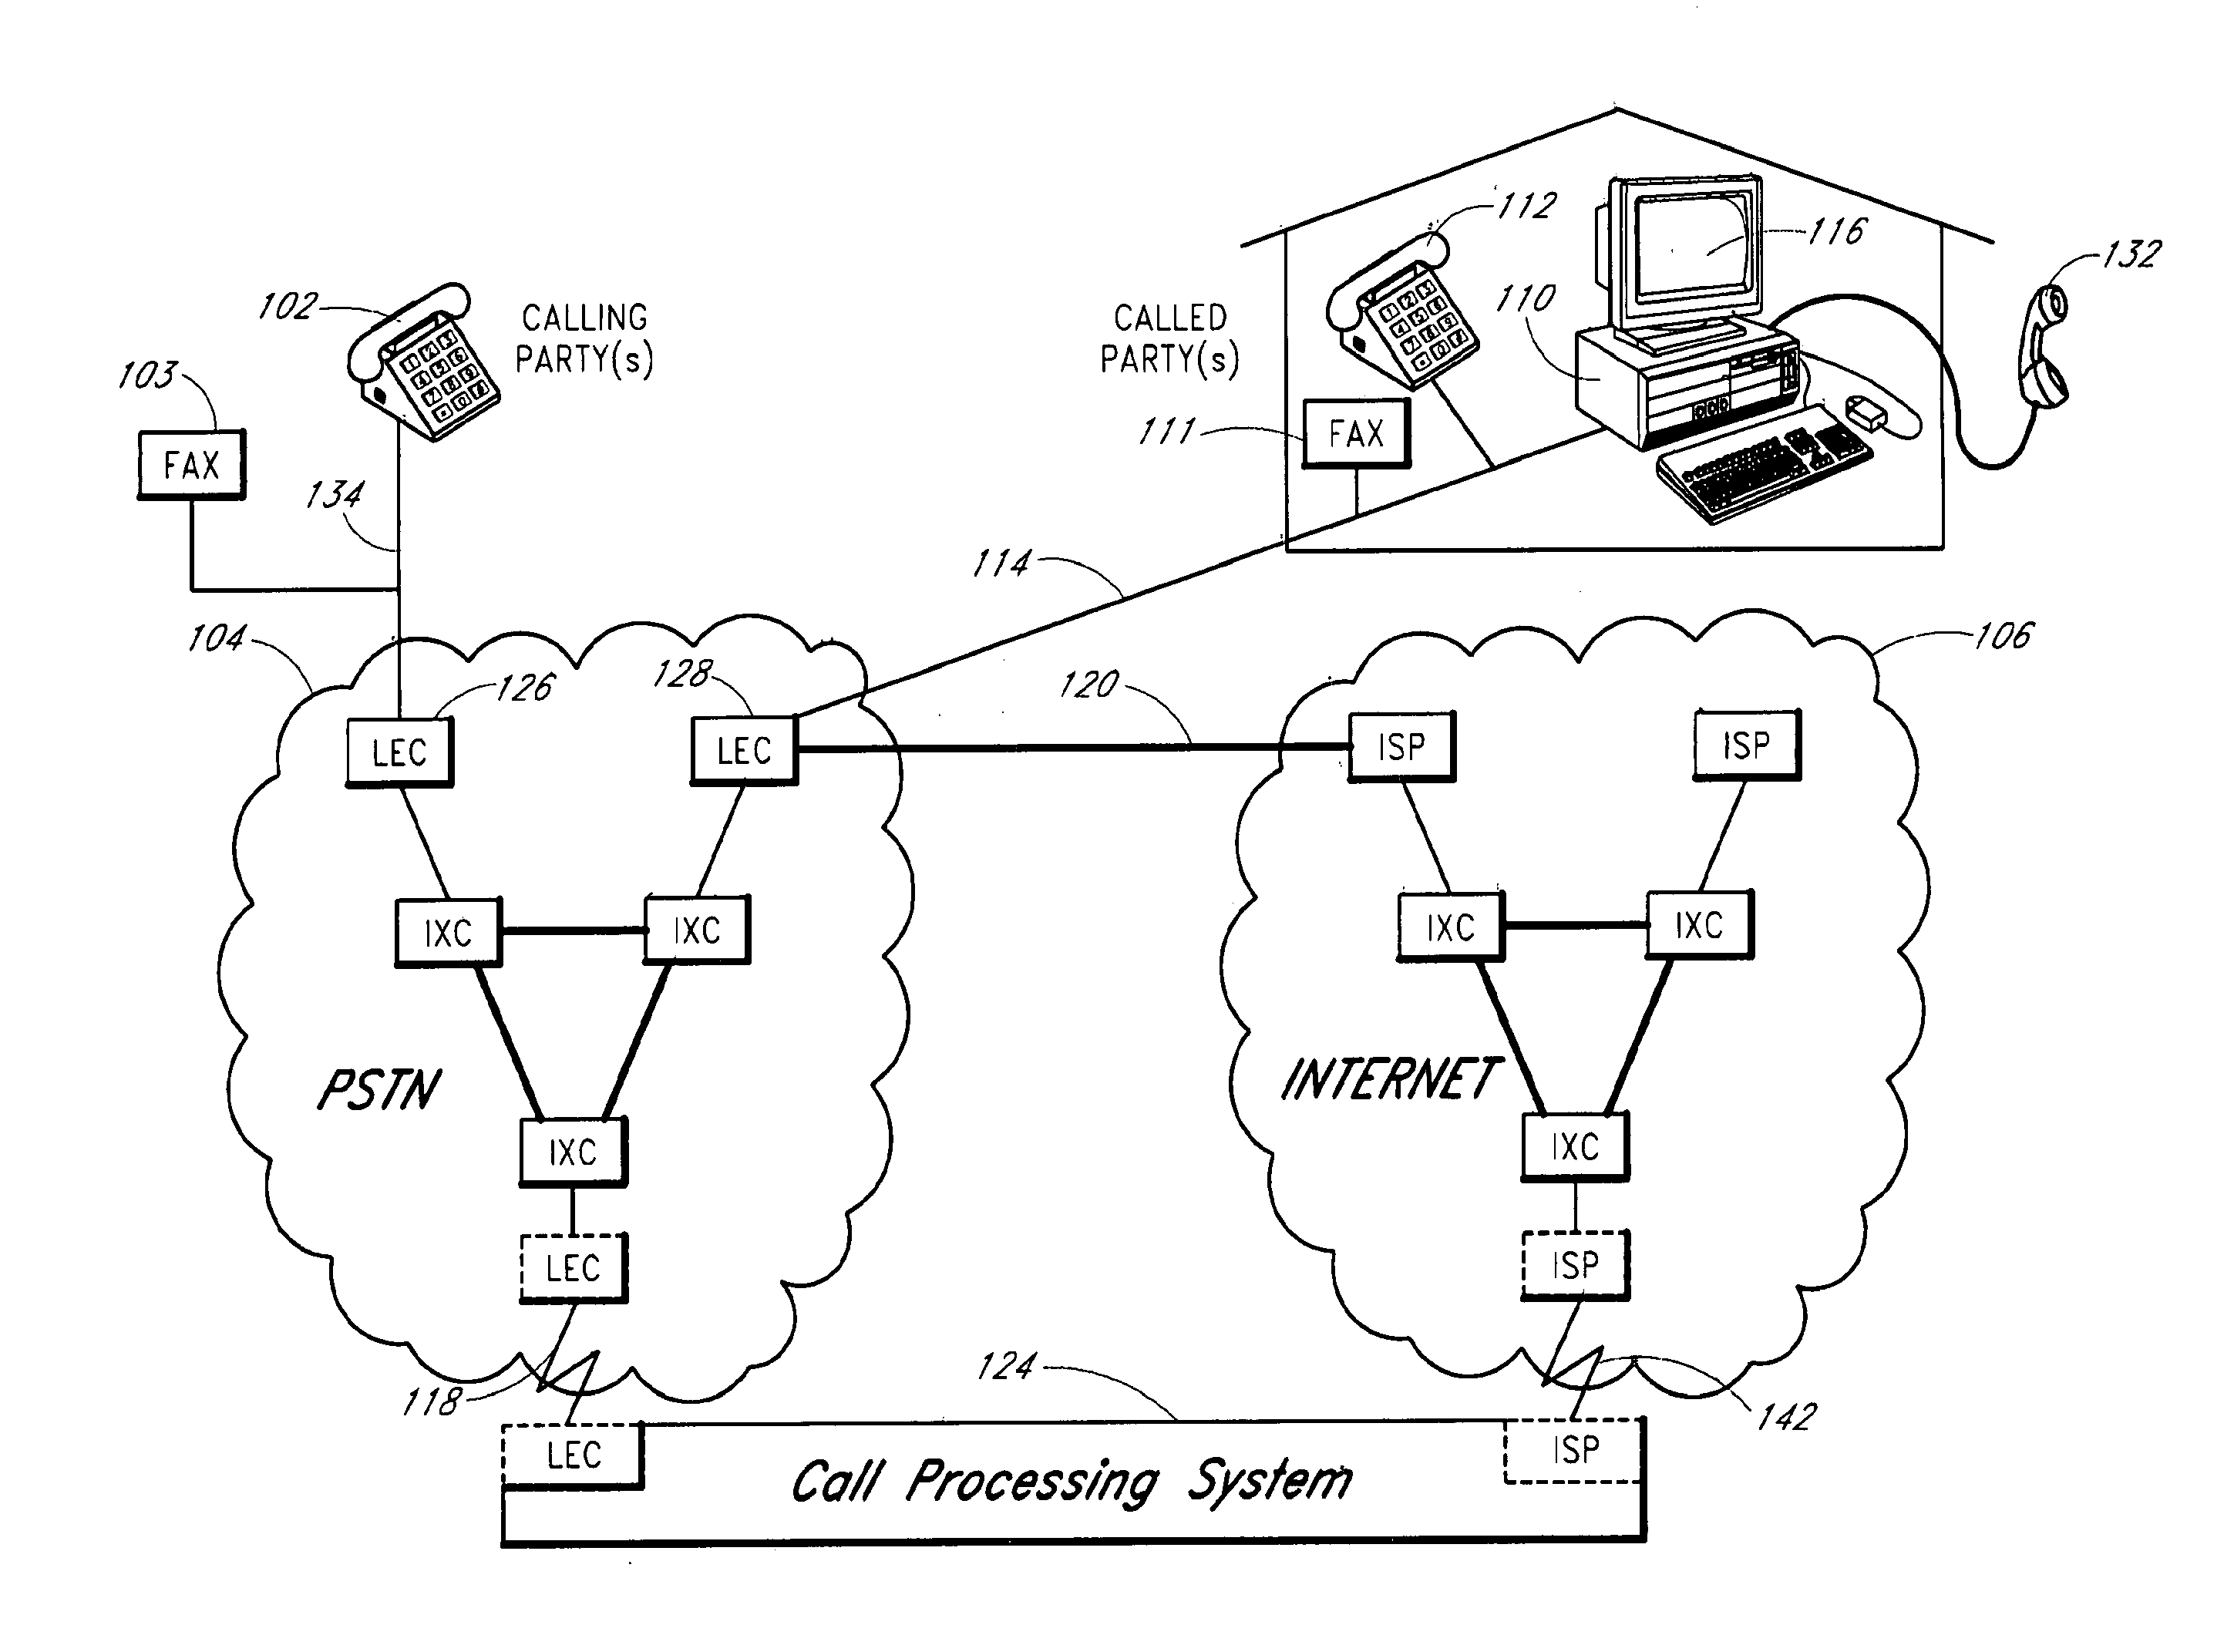 Methods and systems for transferring voice messages and faxes over a network